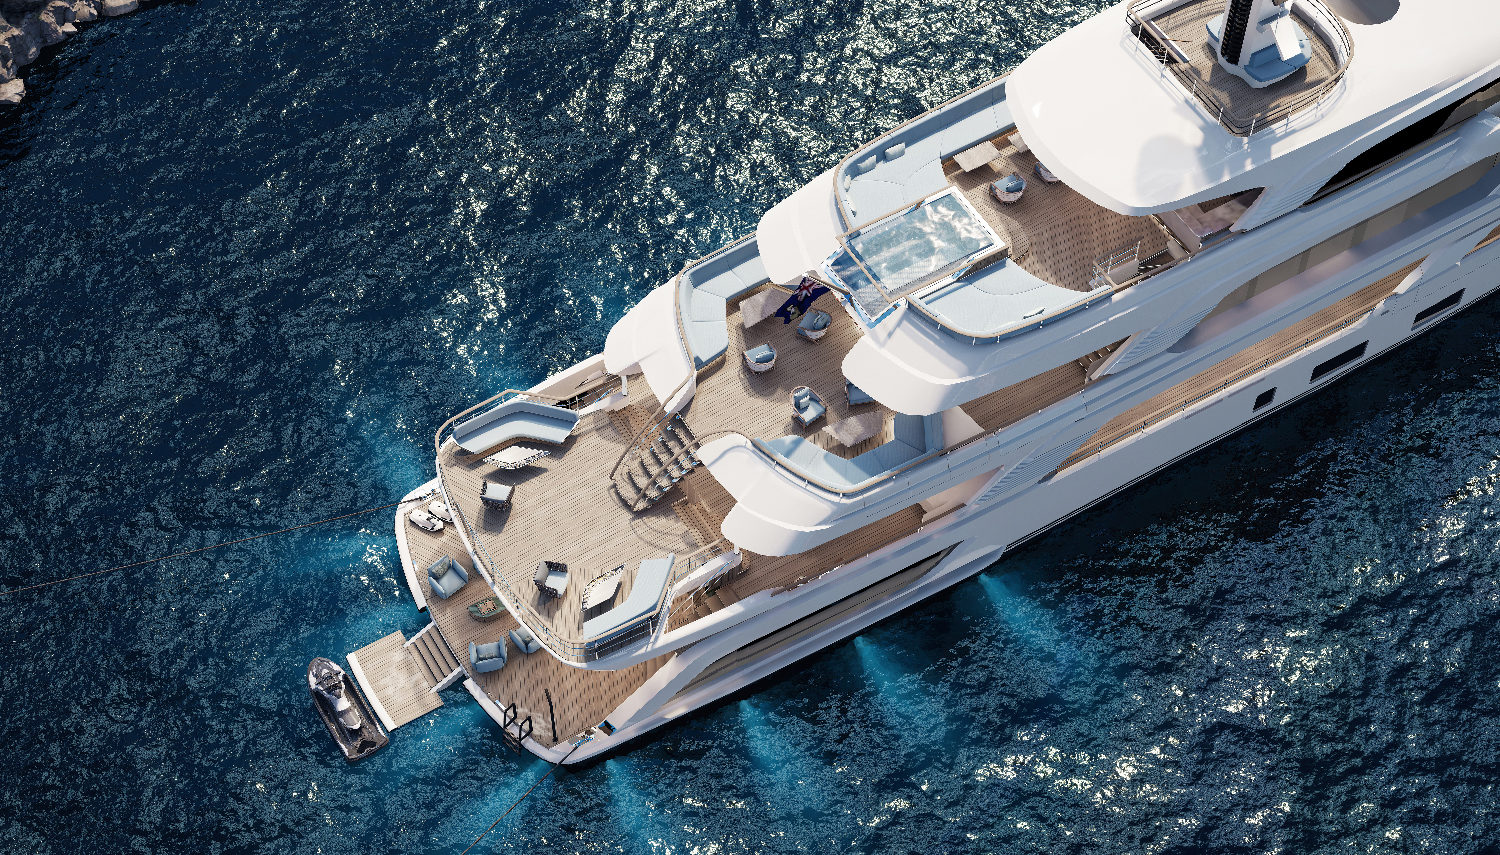 Detail rendering - Lounge- and swimplatform - SF60 - Vripack Design - Go Anywhere Yacht - Alia Yachts - SF Yachts - High Performance Expedition Yacht – Ice Class Hull